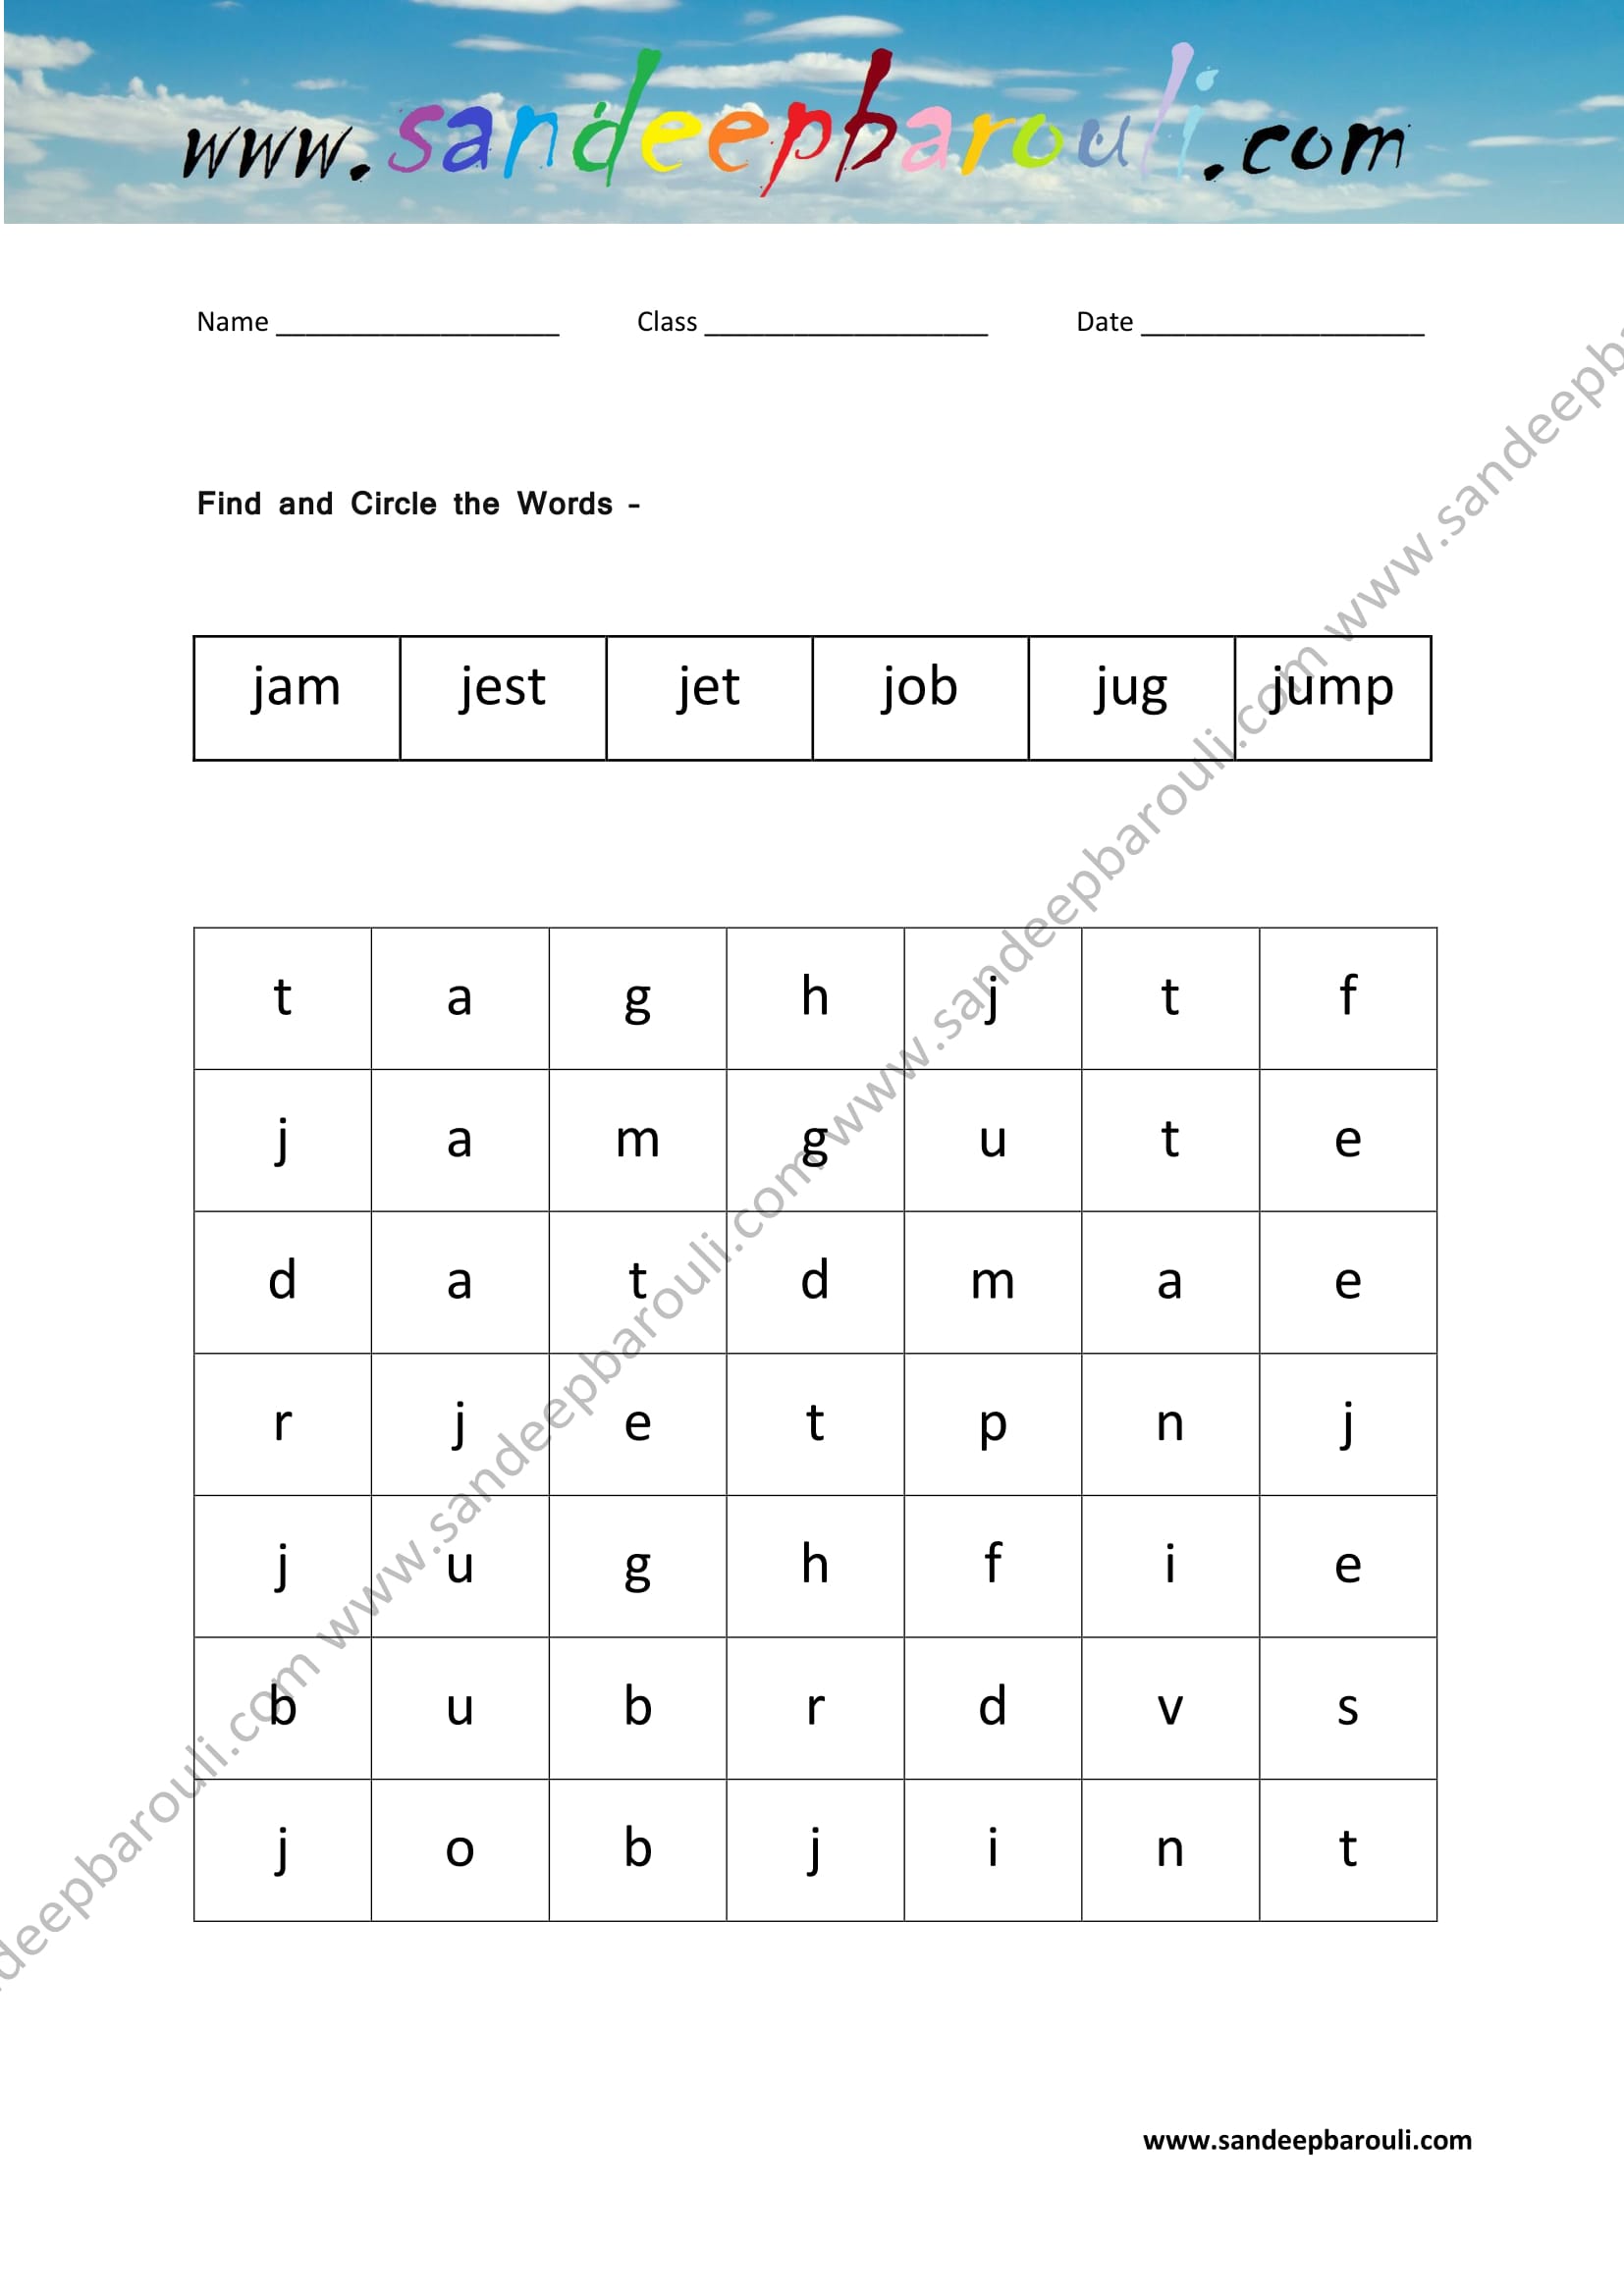 Find and Circle the words for Class 1 (6)